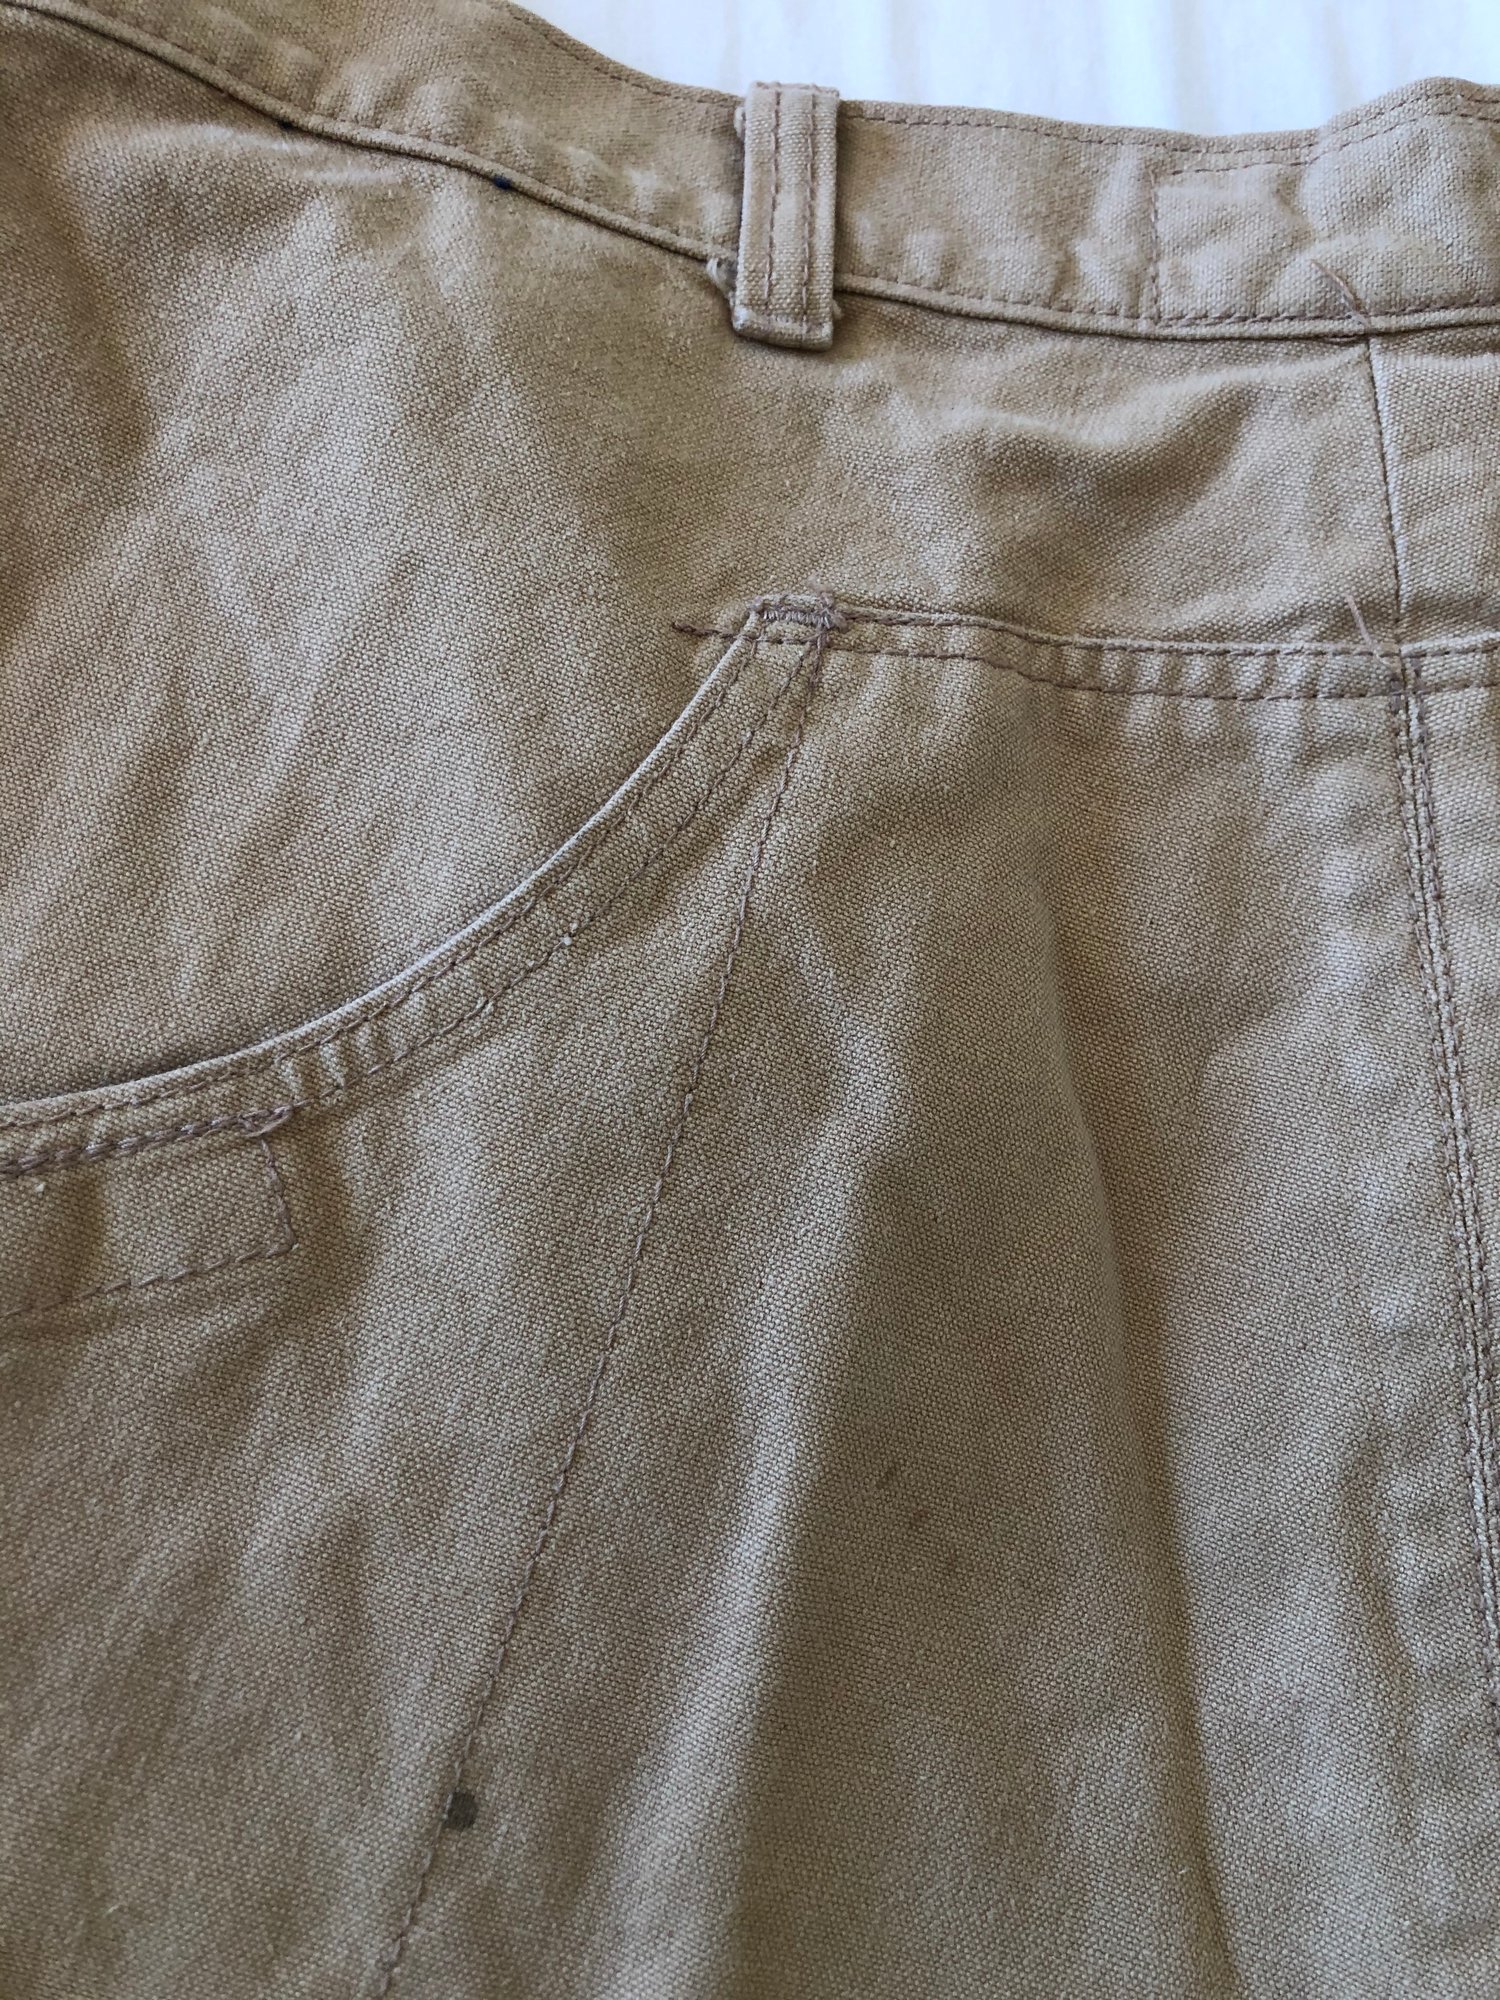 Image of 70s Patagonia 1st Label Shants Stand Up Shorts